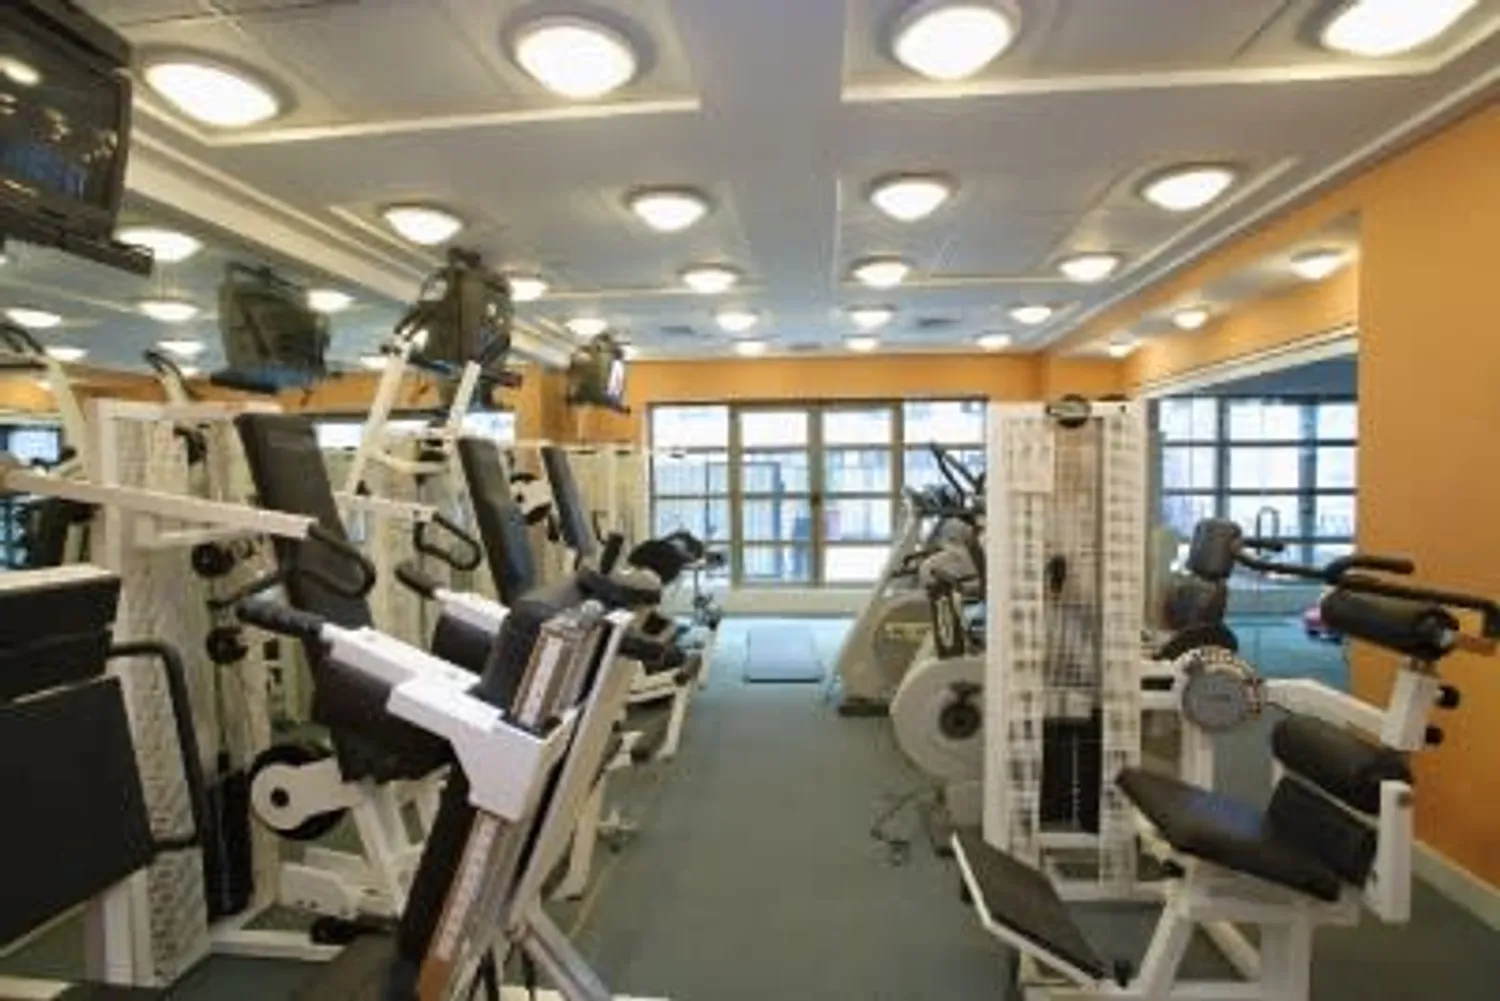 Fitness Center plus weight room